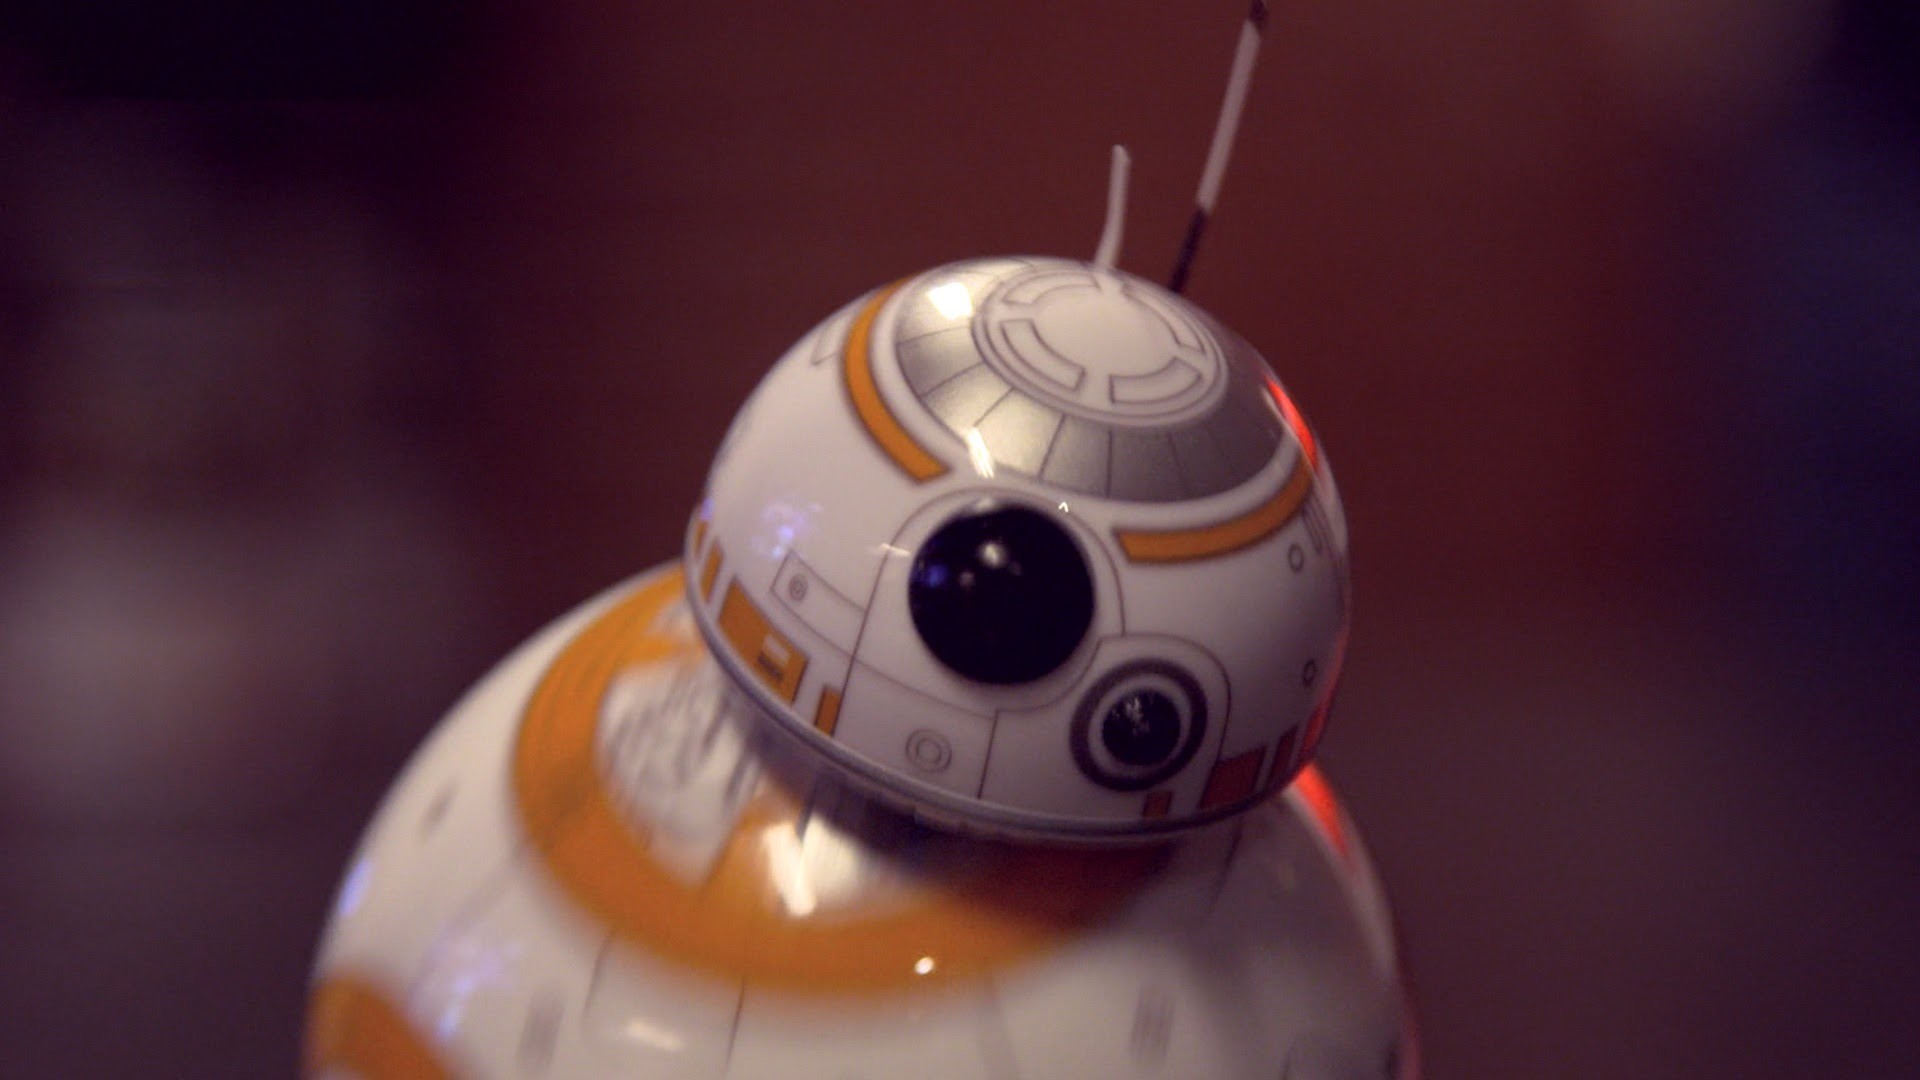 1920x1080 Hands on With App-Controlled BB-8 from Star Wars: The Force Awakens -  YouTube